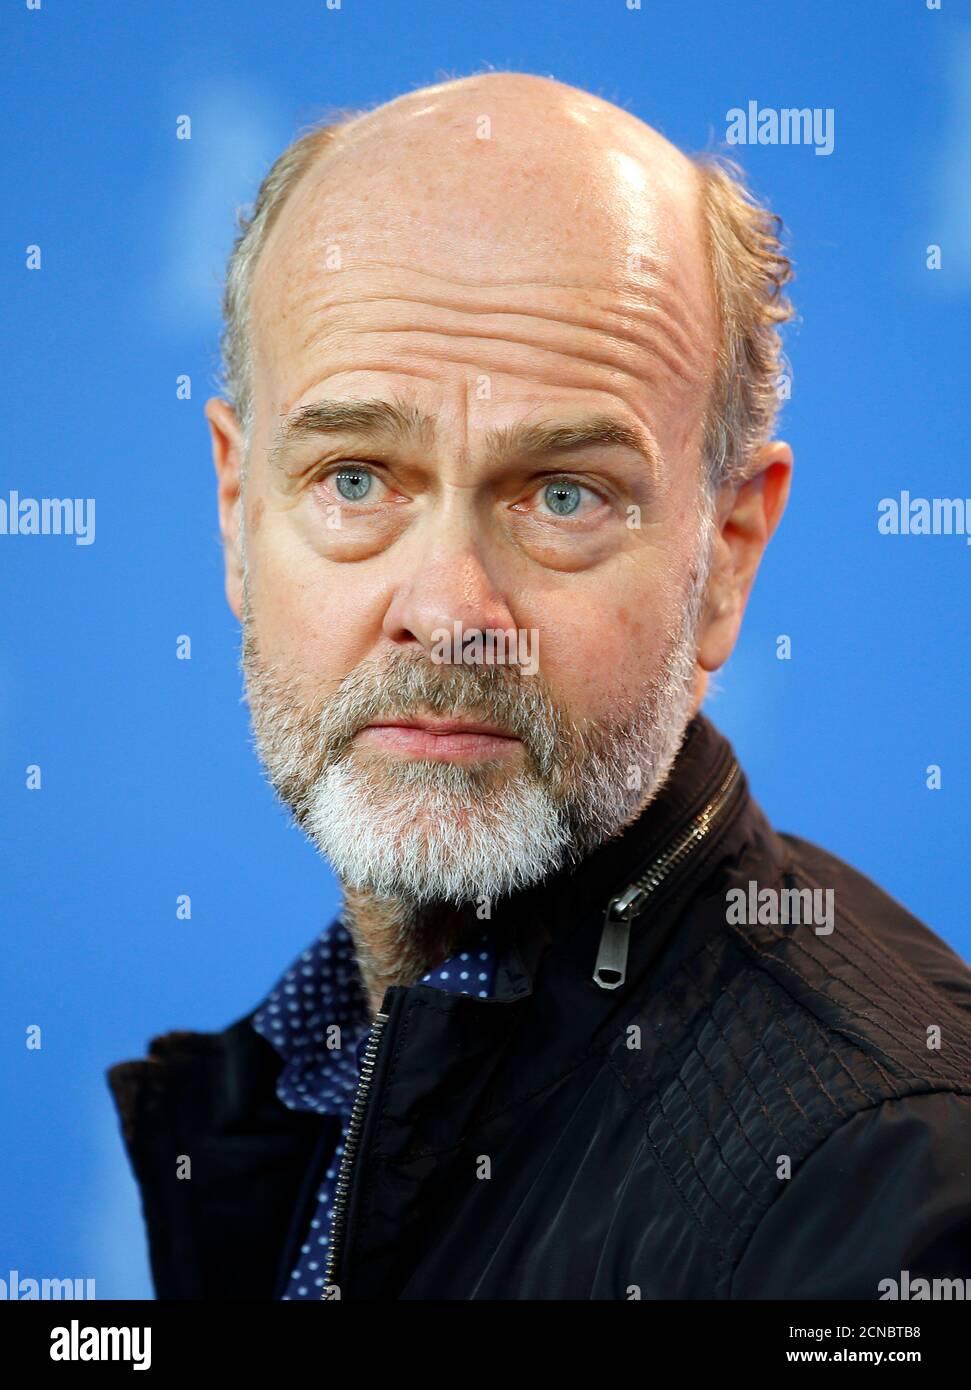 Director and executive producer Erik Poppe poses during a photocall to  promote the movie Utoya 22.juli (U - Jully 22) at the 68th Berlinale  International Film Festival in Berlin, Germany, February 19,